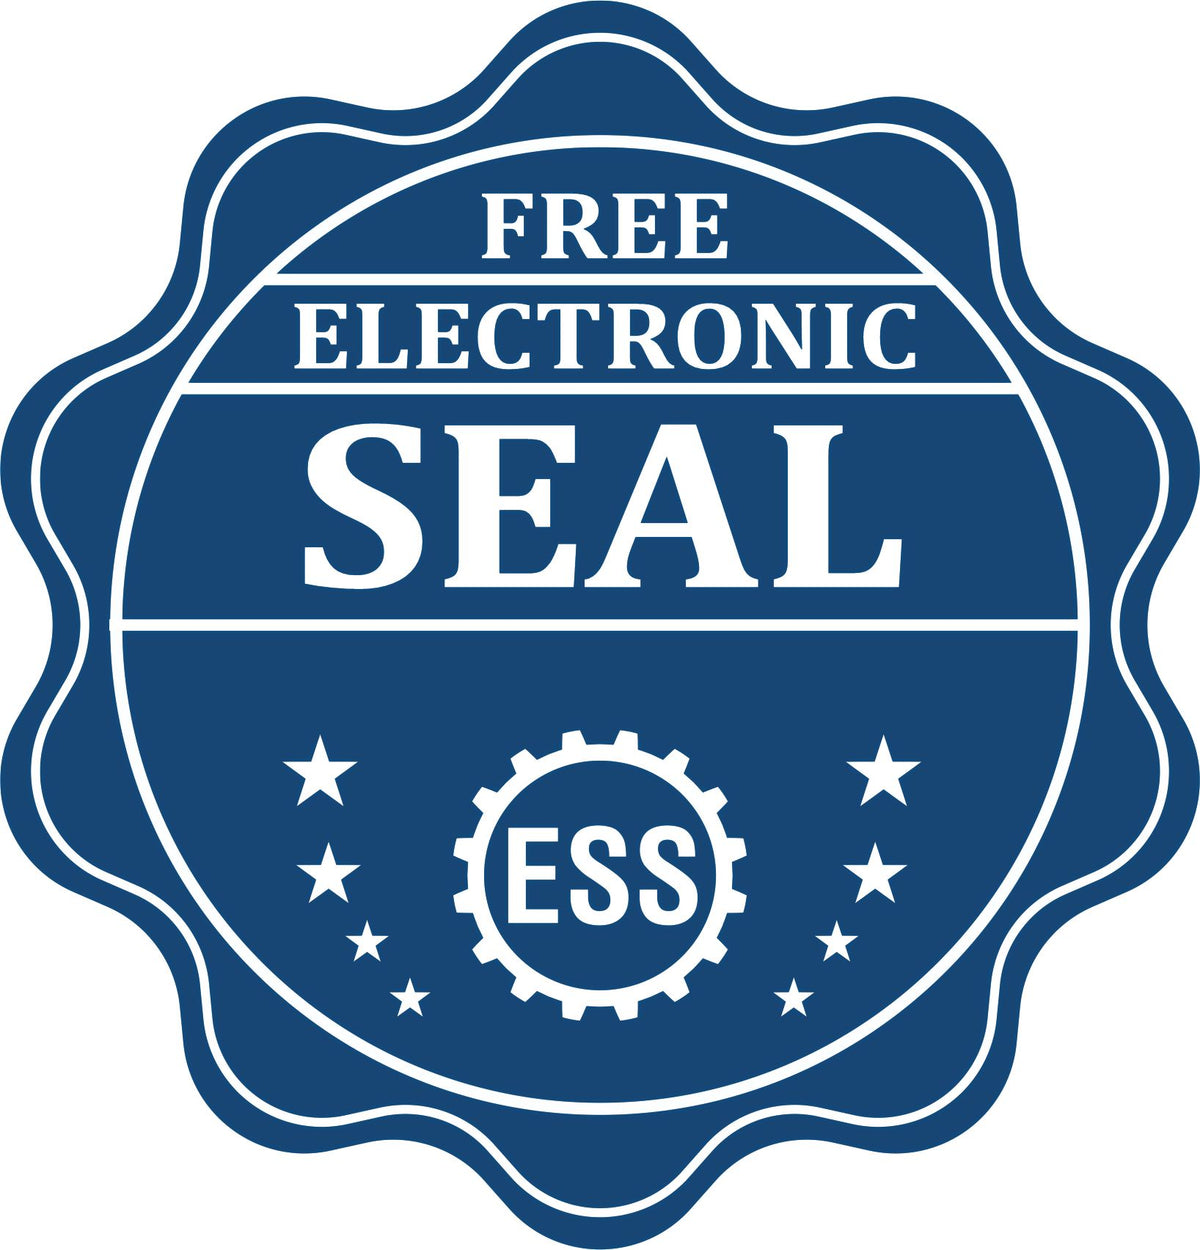 A badge showing a free electronic seal for the Premium MaxLight Pre-Inked Oklahoma Landscape Architectural Stamp with stars and the ESS gear on the emblem.